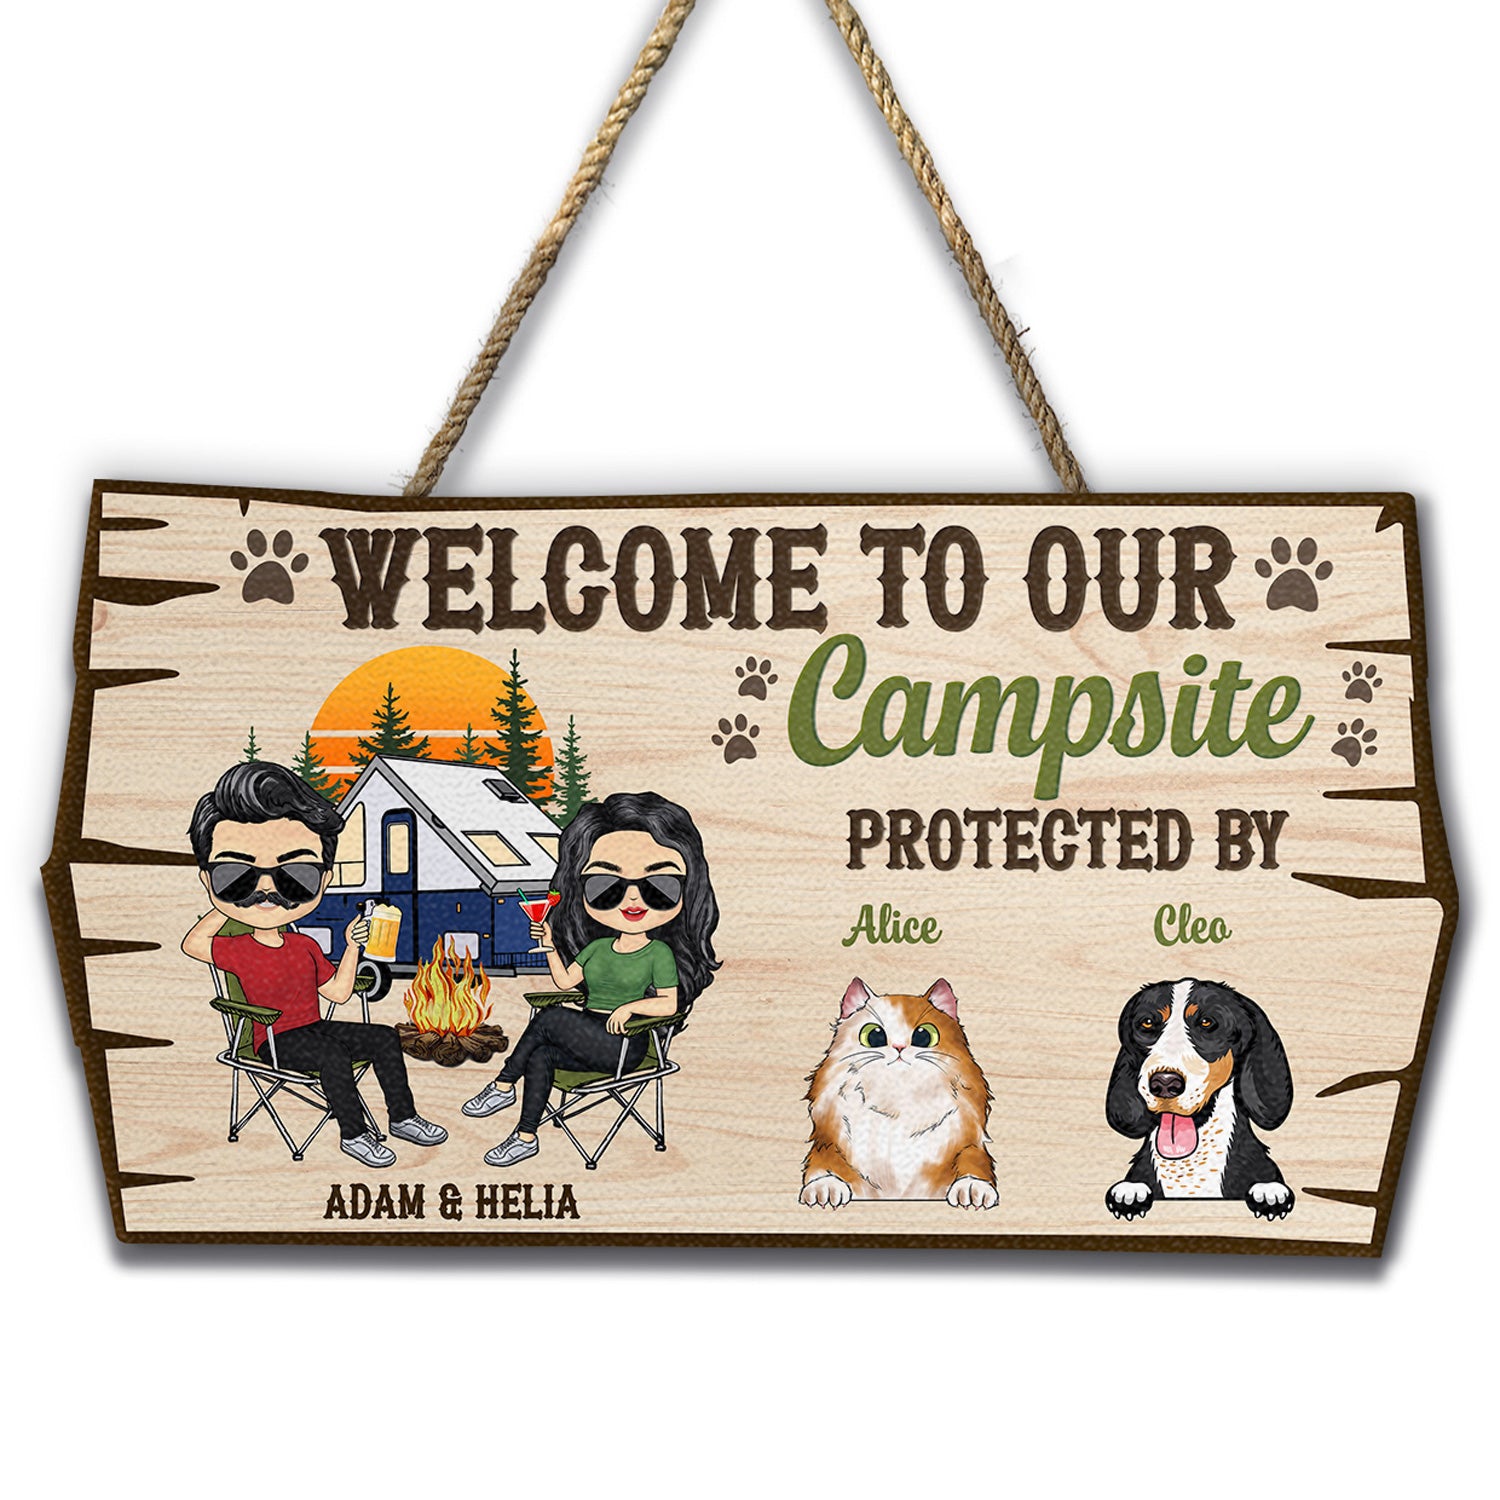 Welcome To Our Campsite Protected By Dogs Cats Pets - Gift For Couples, Campers, Camping Lovers, Travelers - Personalized Custom Shaped Wood Sign